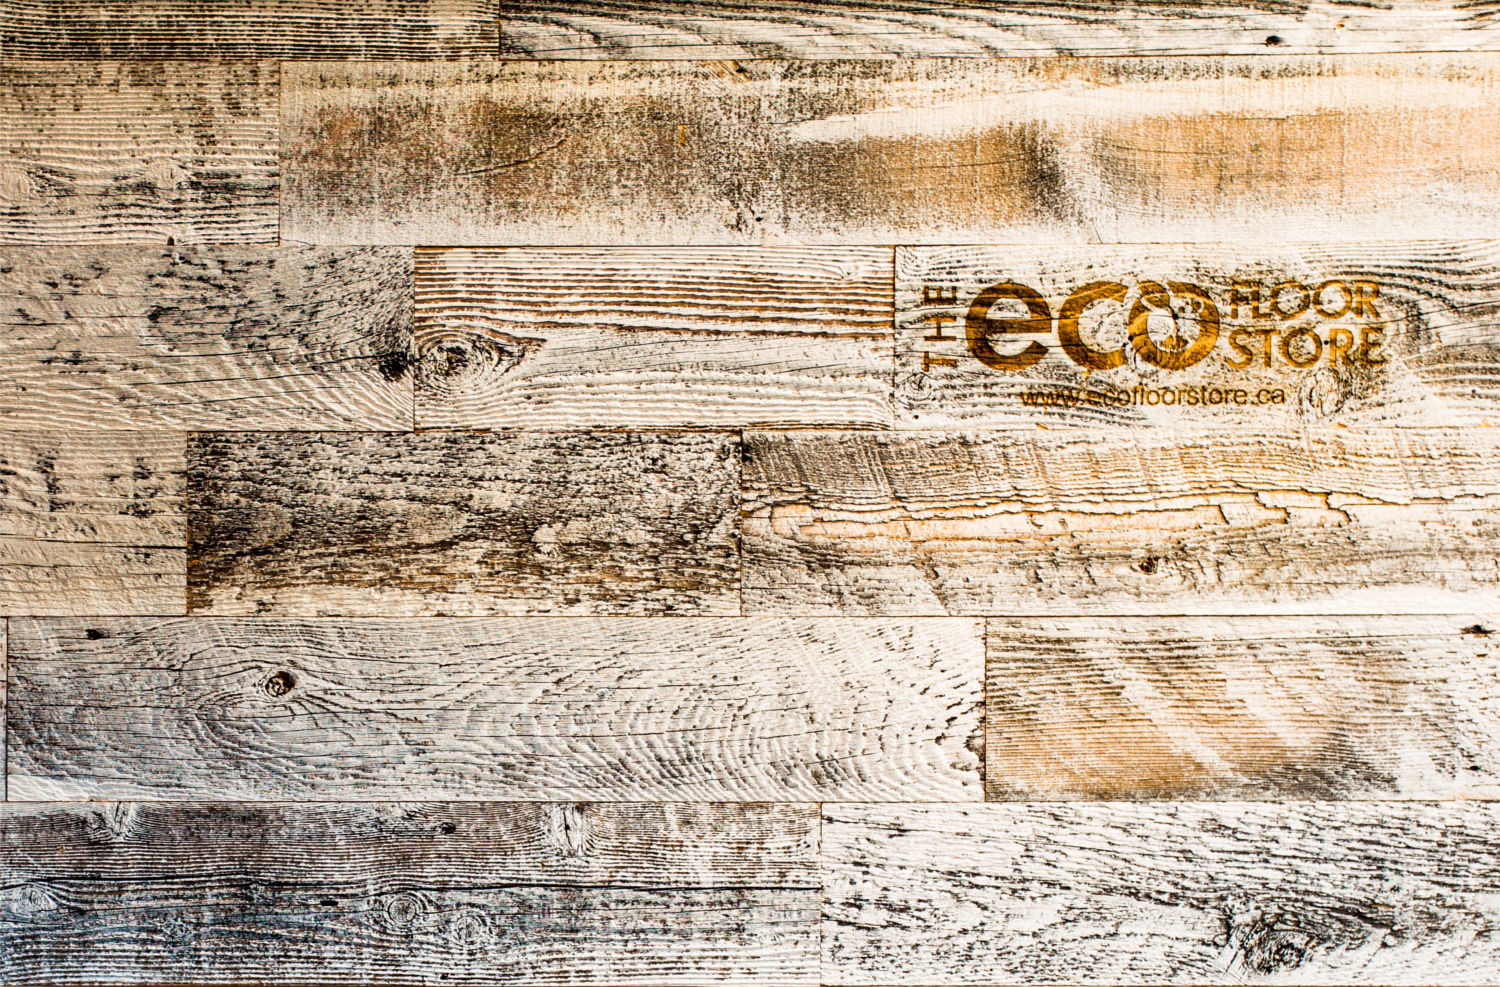 Eco Floor Store Flooring & Wall Surfaces